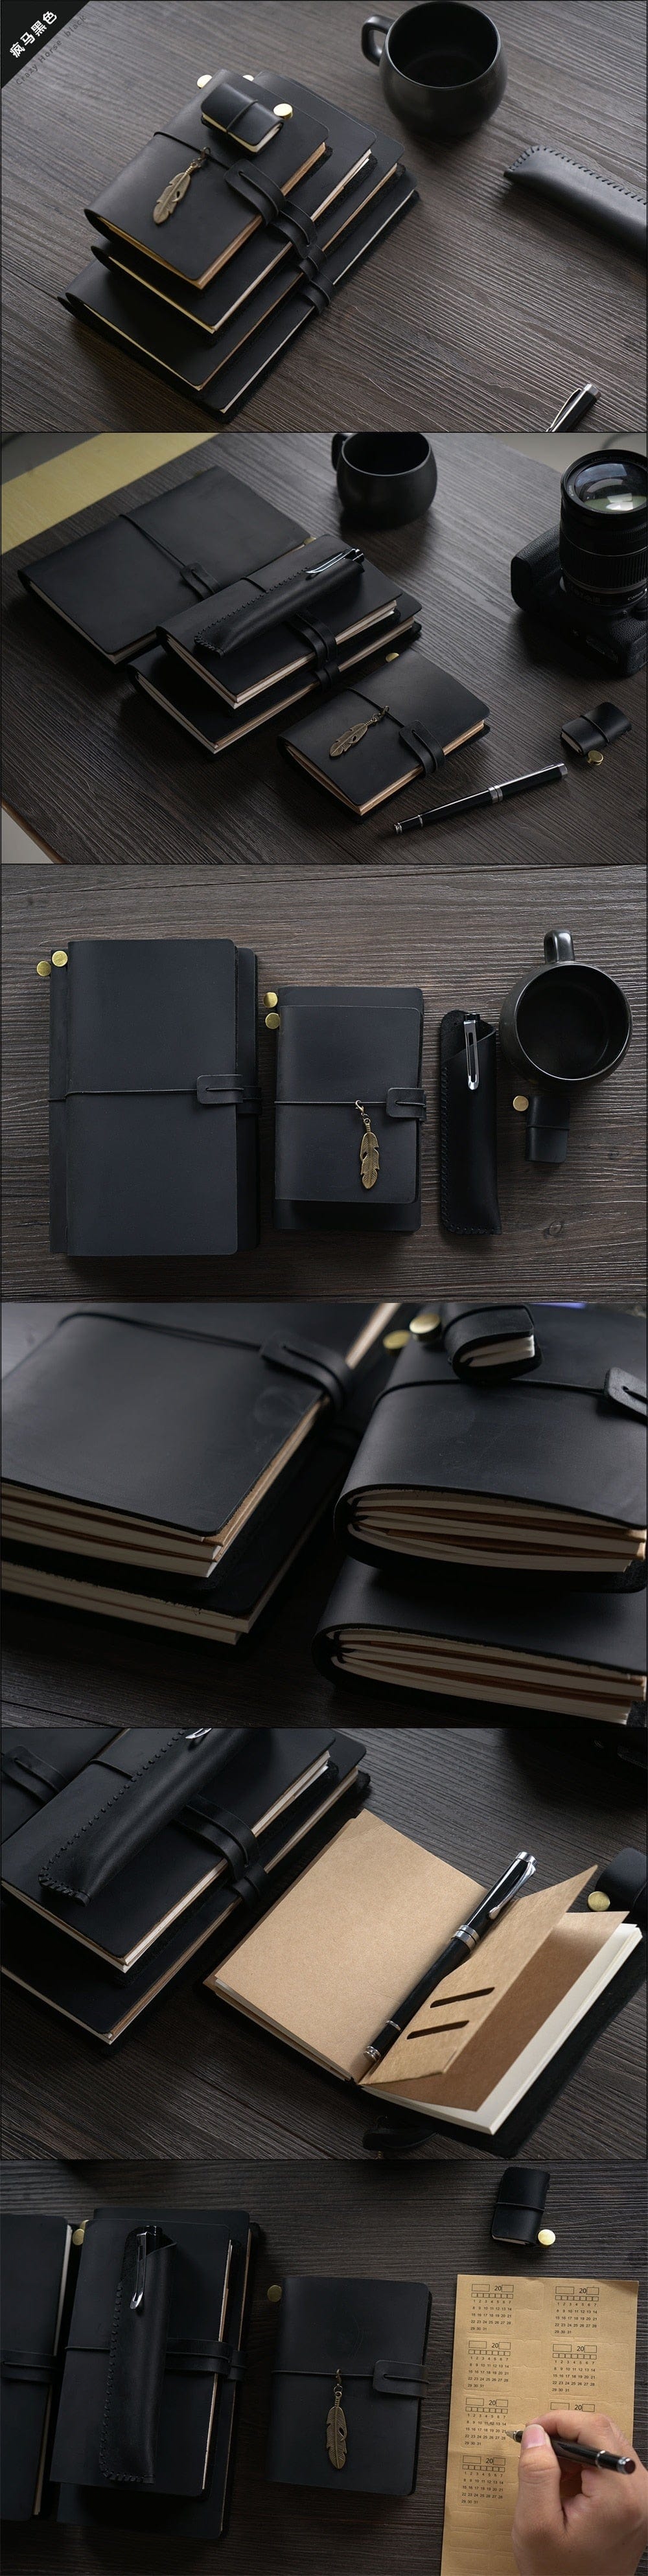 KUMA Stationery & Crafts  Genuine Leather Travelers Notebook ✨ Free Embossing ✨ 4 Sizes & 8 Colors